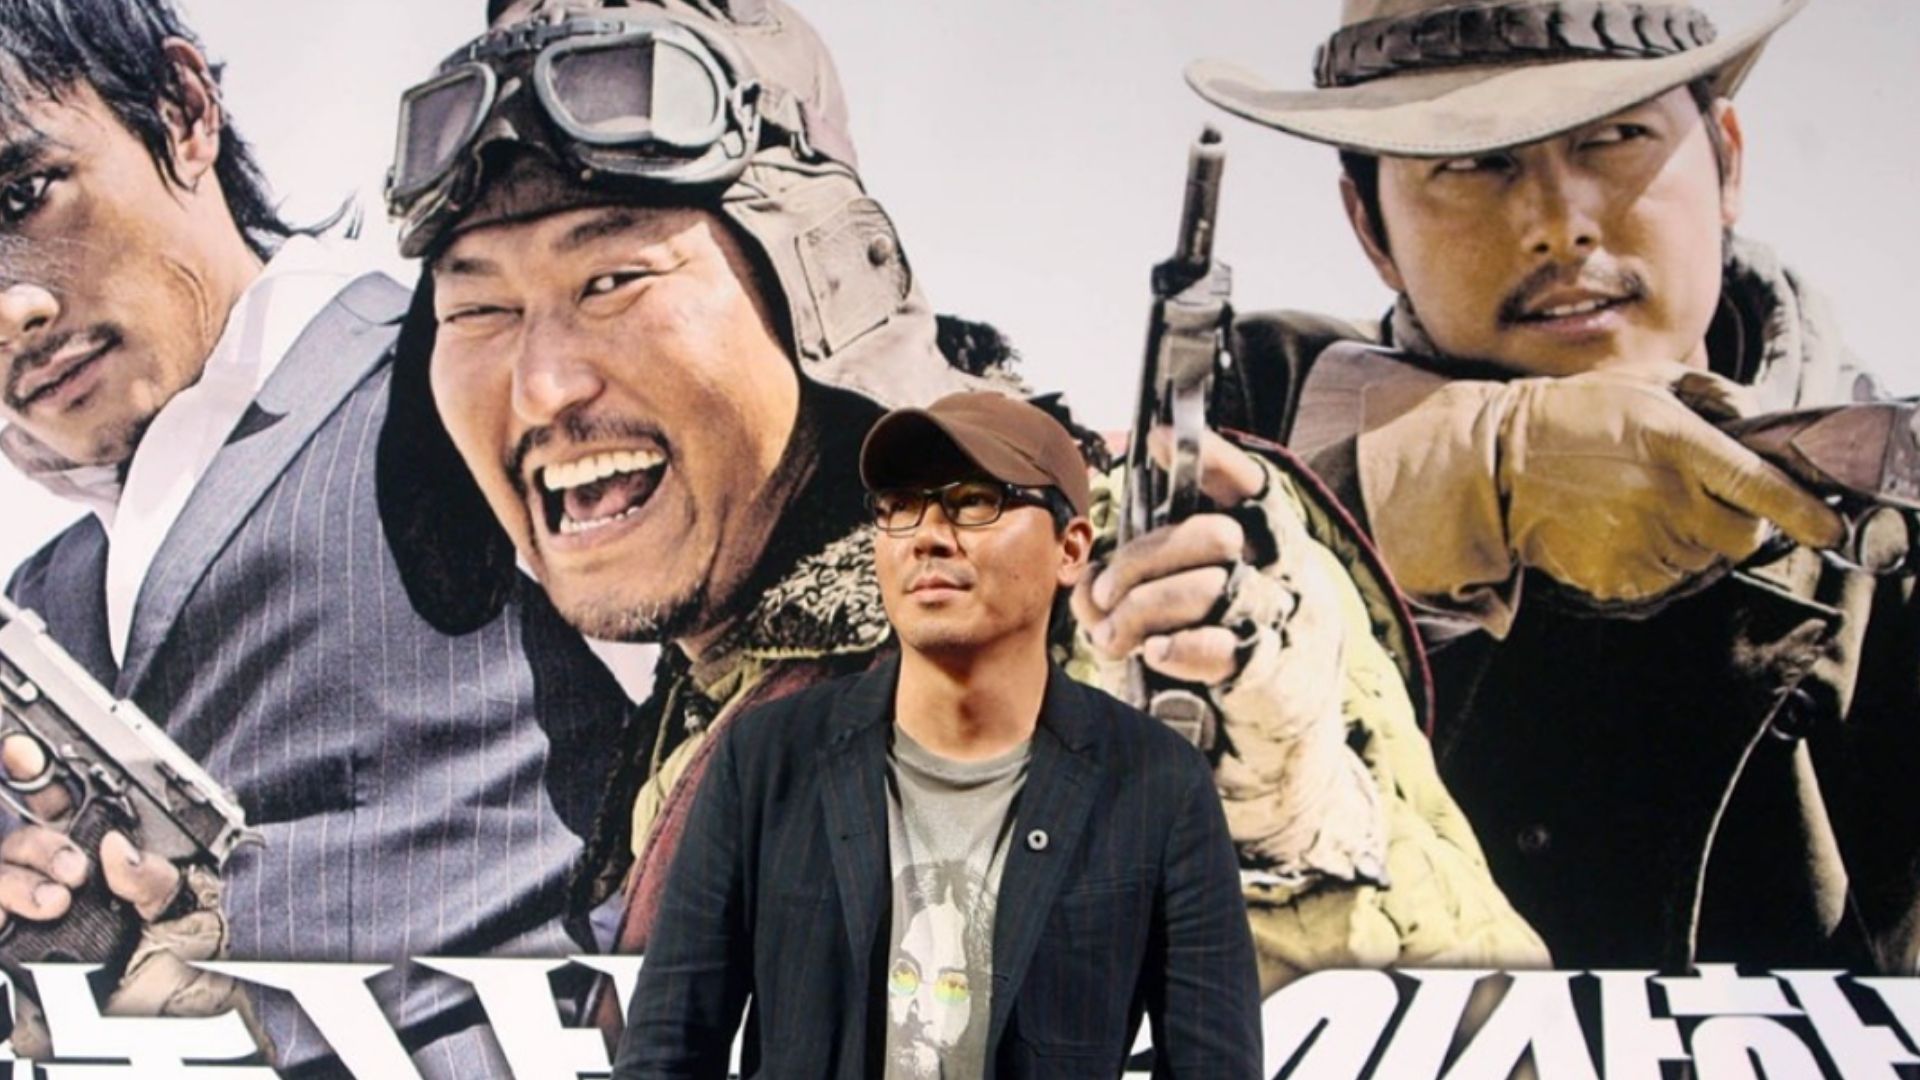 (2) The Good, the Bad, the Weird_KIM Jee-woon